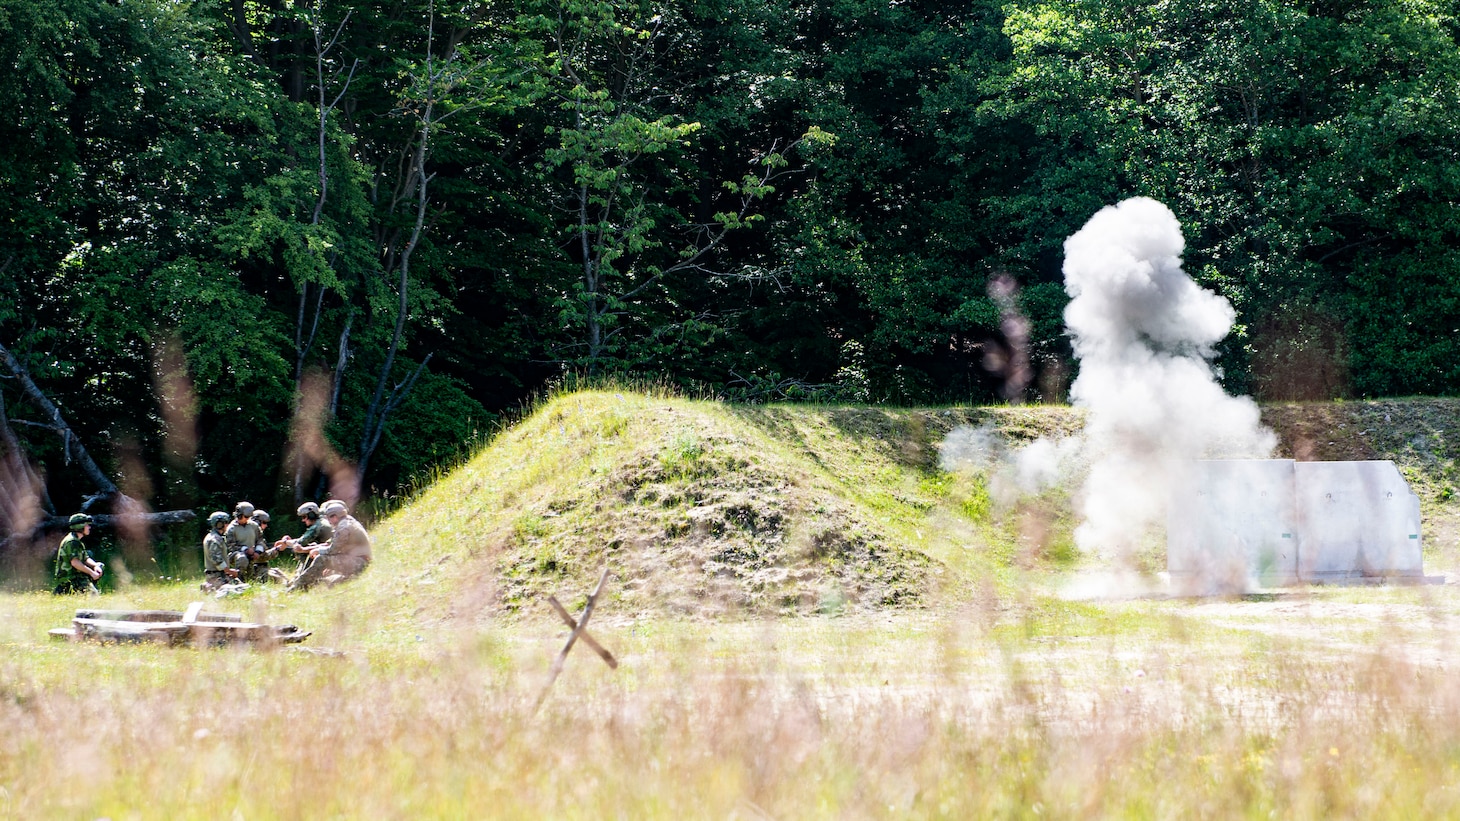 Service members of partner nations detonate explosives during Swedish explosive familiarization training while at exercise BALTOPS 22, June 07, 2022.